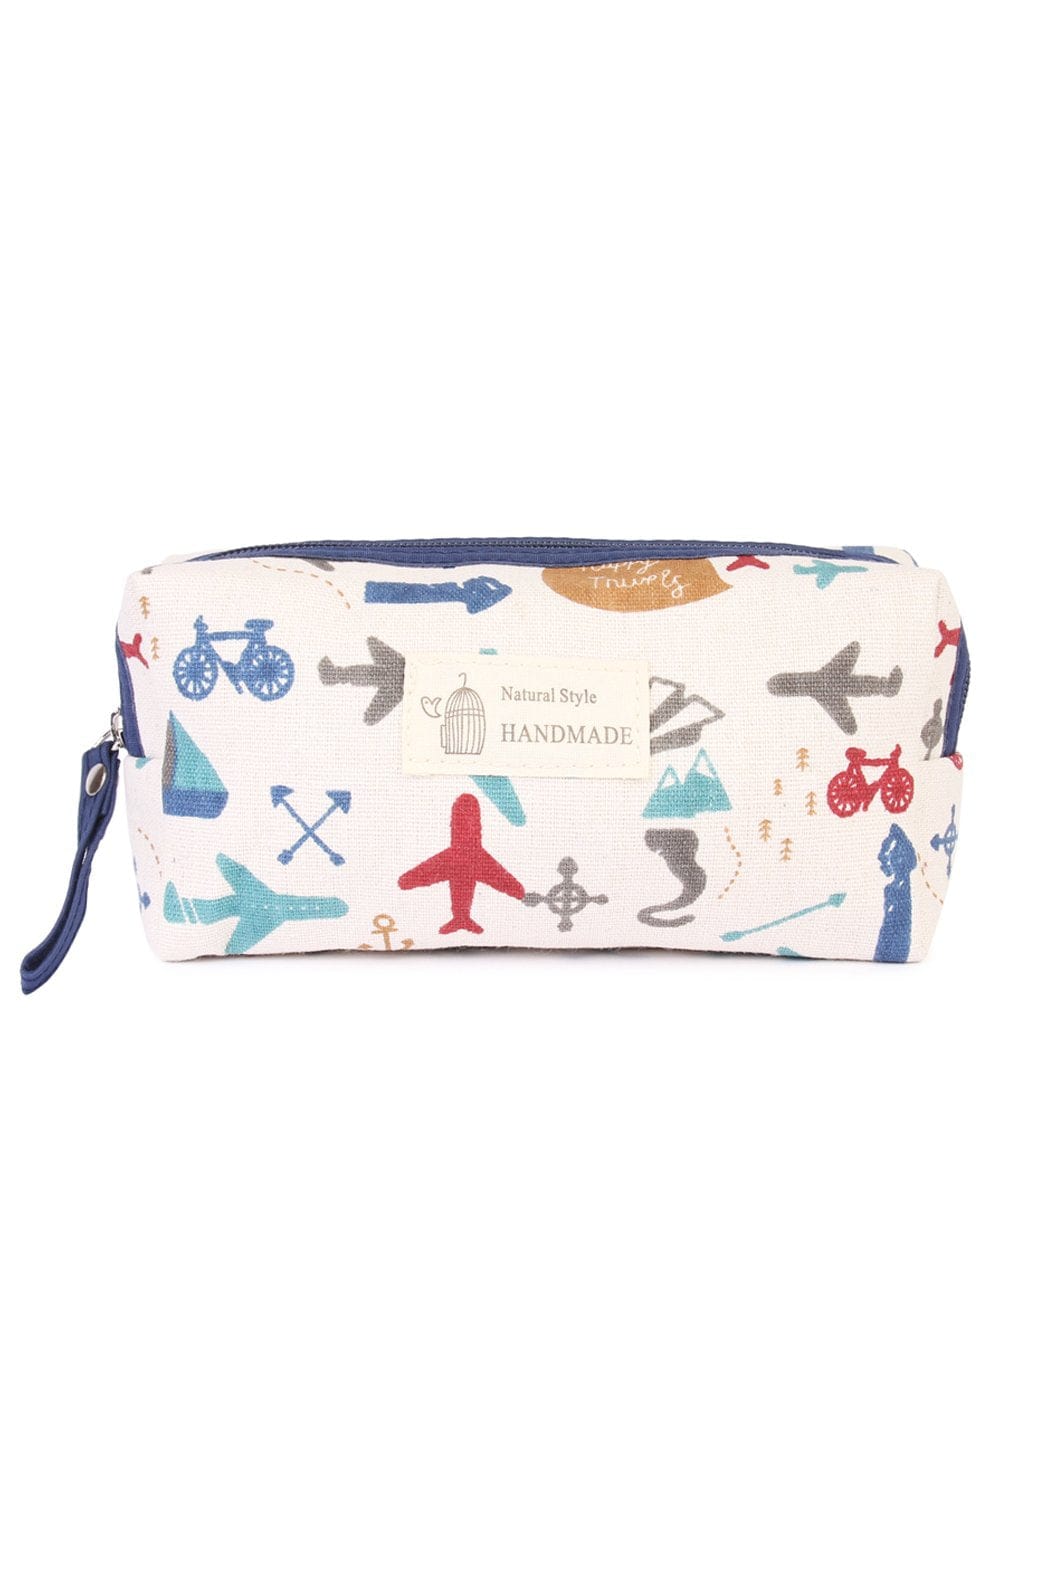 J122-6 - Summer Airplane Cosmetic Pouch